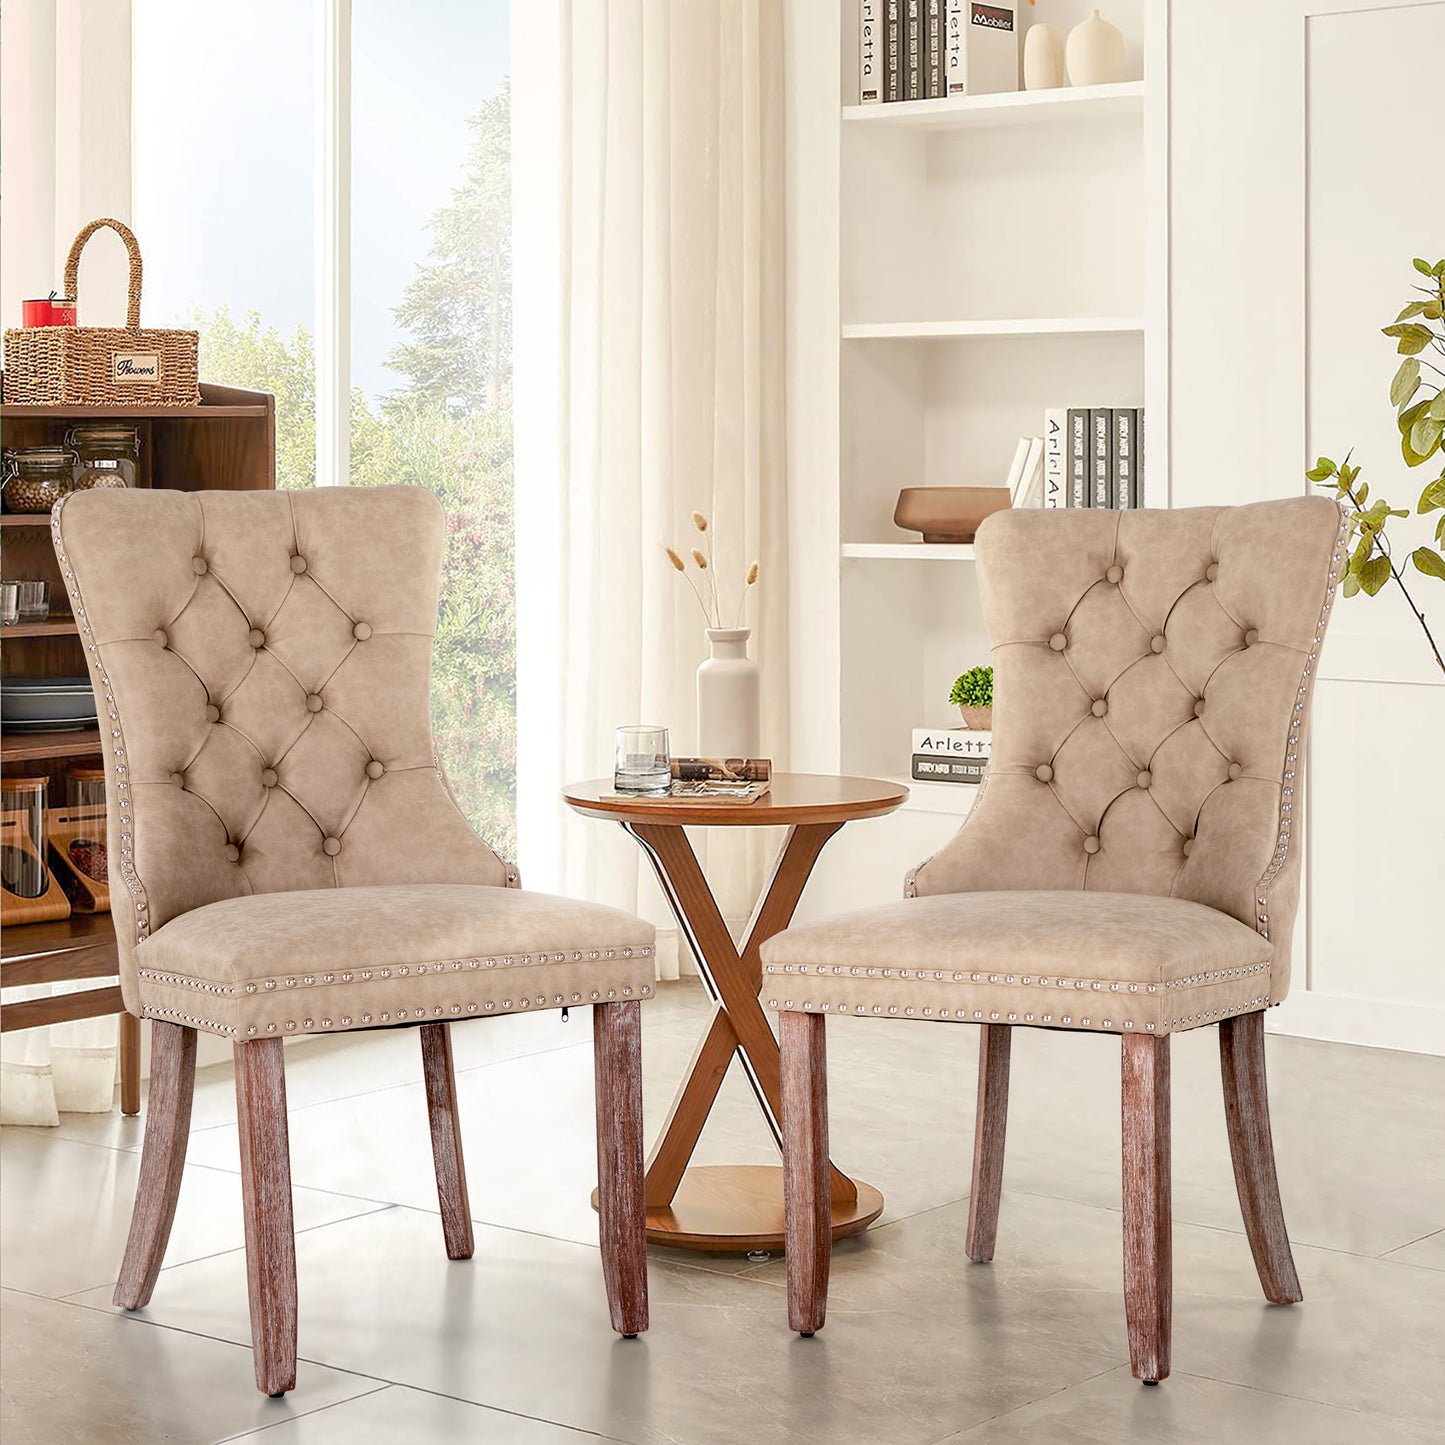 Sophia & William PU Leather Upholstered Dining Chairs with Ring Back-Set of 2-Beige